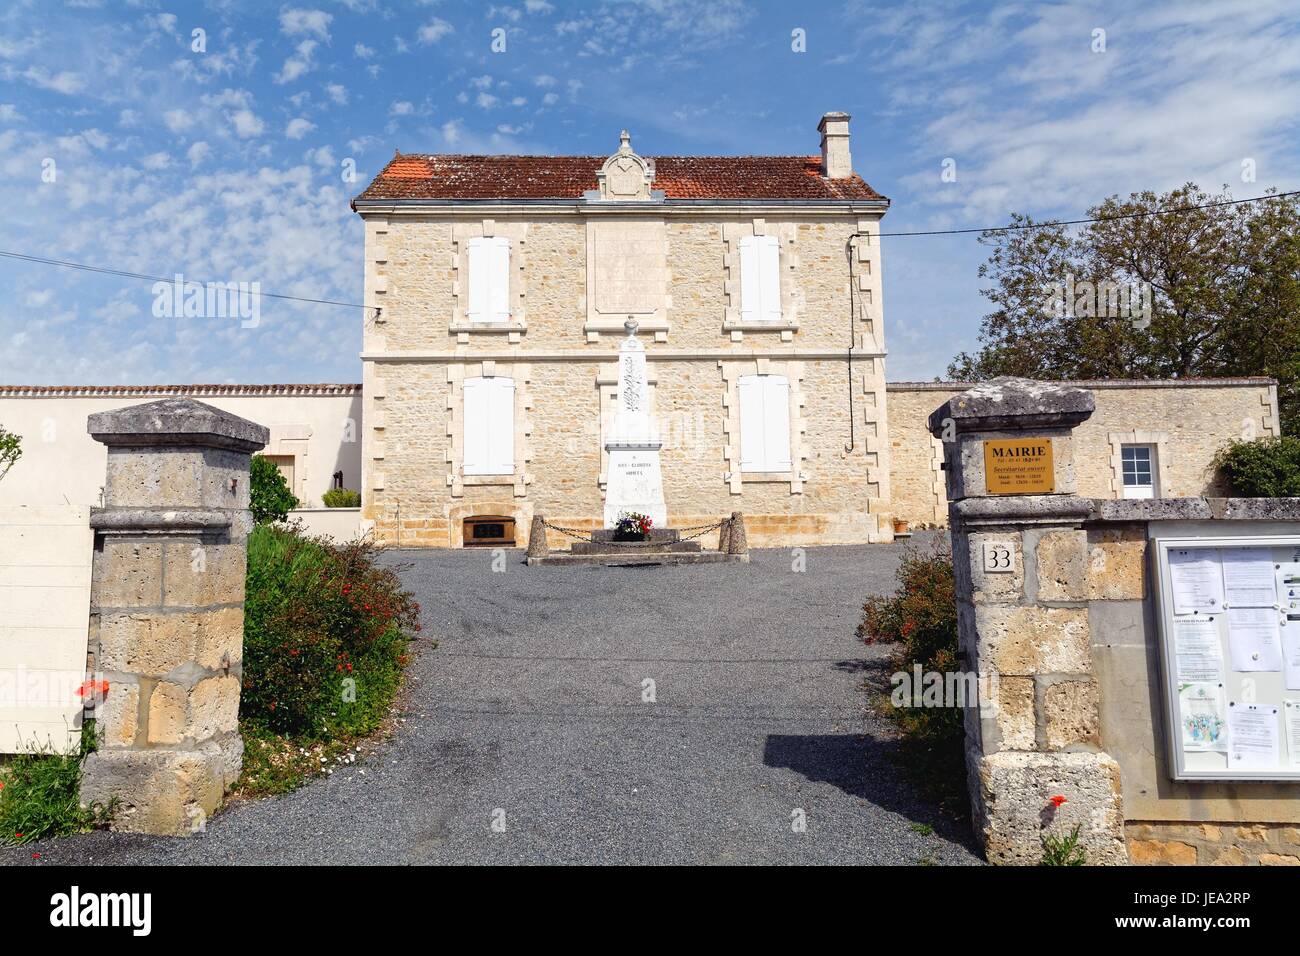 French Maire building in Ventouse Poitou Charentes France Stock Photo